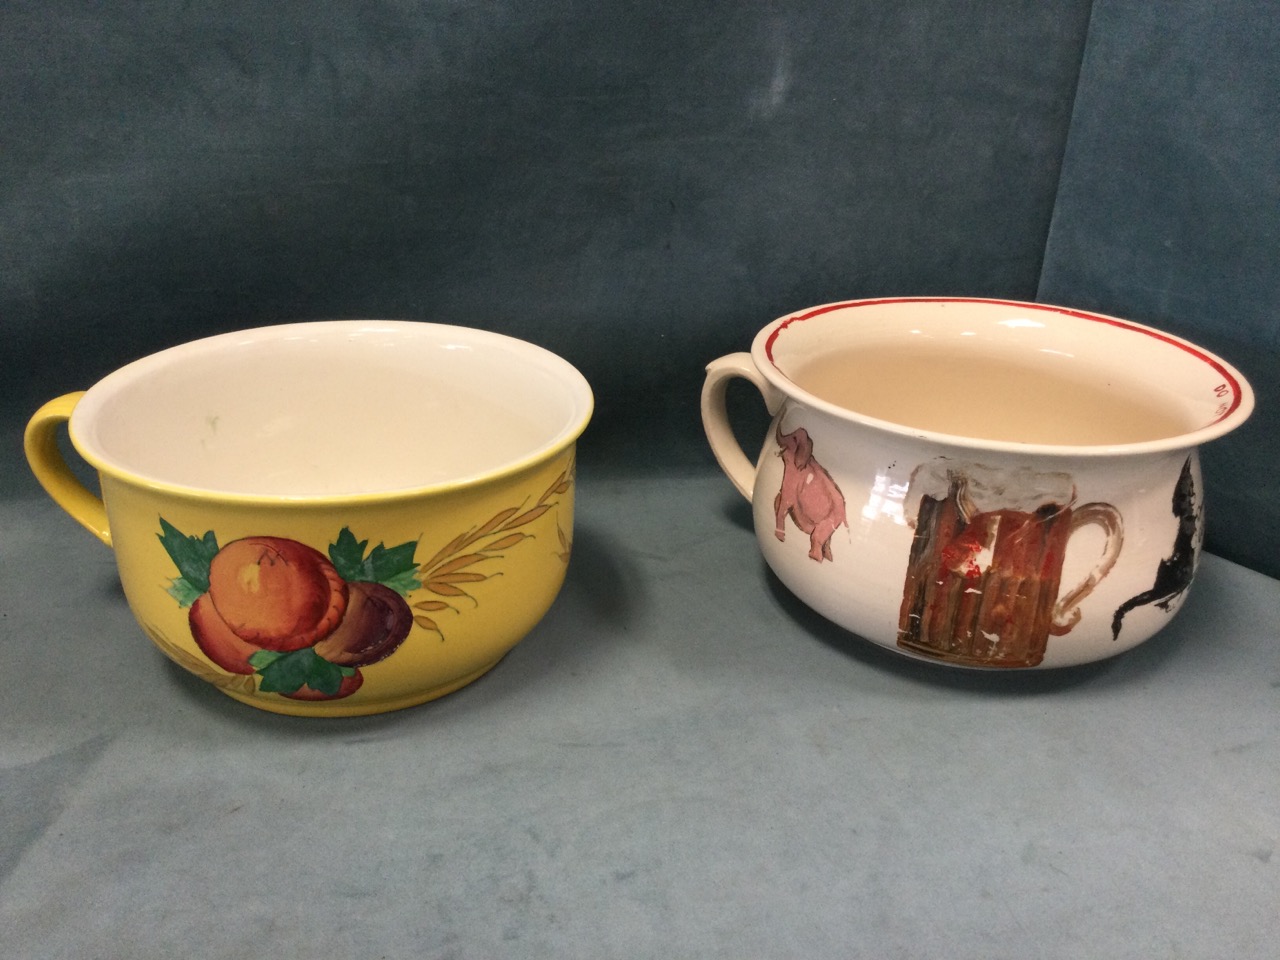 A Minton handpainted chamber pot glazed with fruit on yellow ground; an Arthur Wood potty - Image 2 of 3